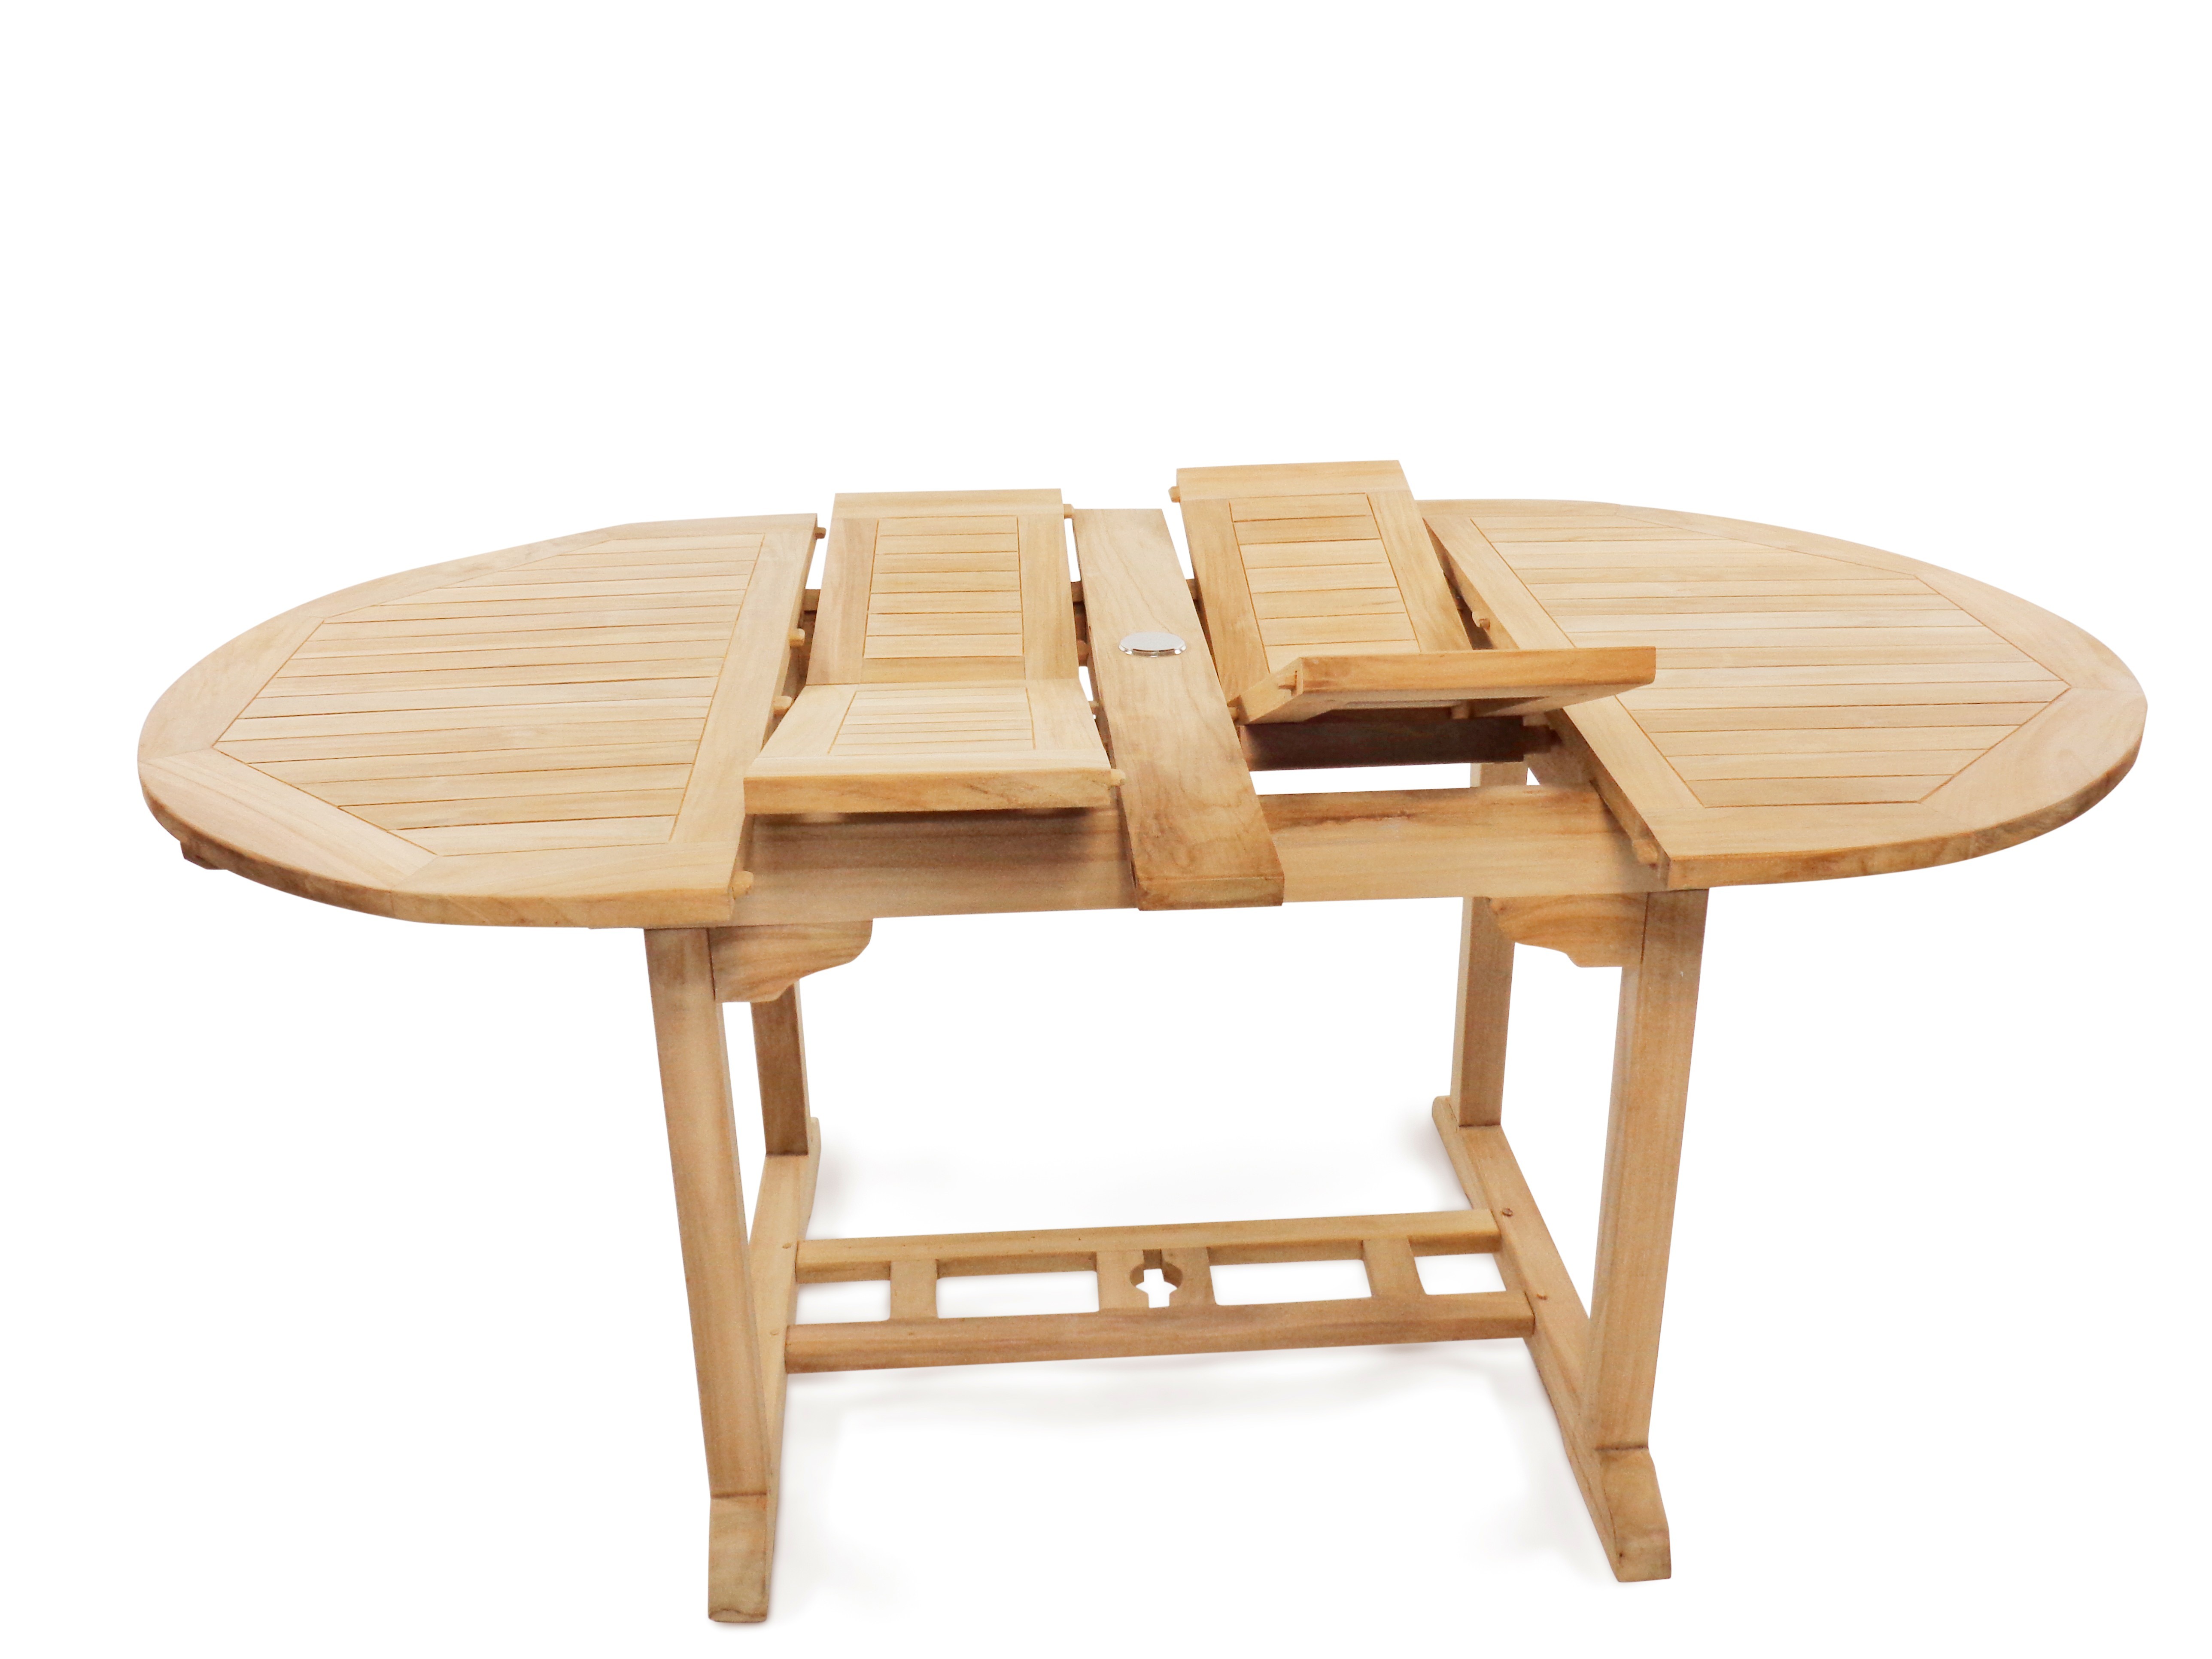 Buckingham 66" x 39" Double Leaf Oval Teak Extension Table...Seats 6...makes 3 Different Size Tables